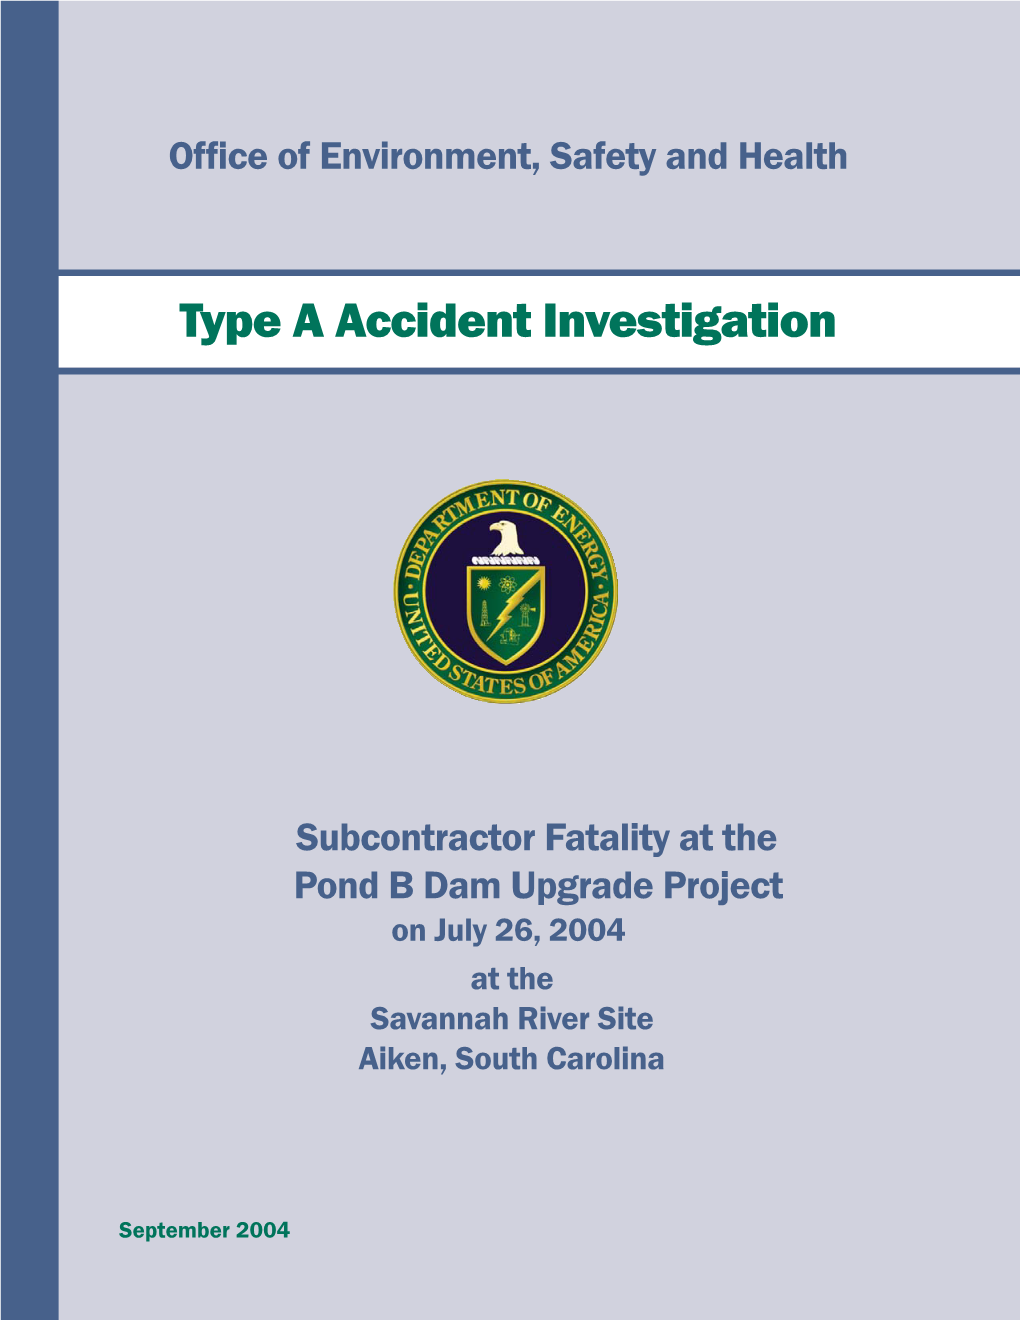 Type a Accident Investigation